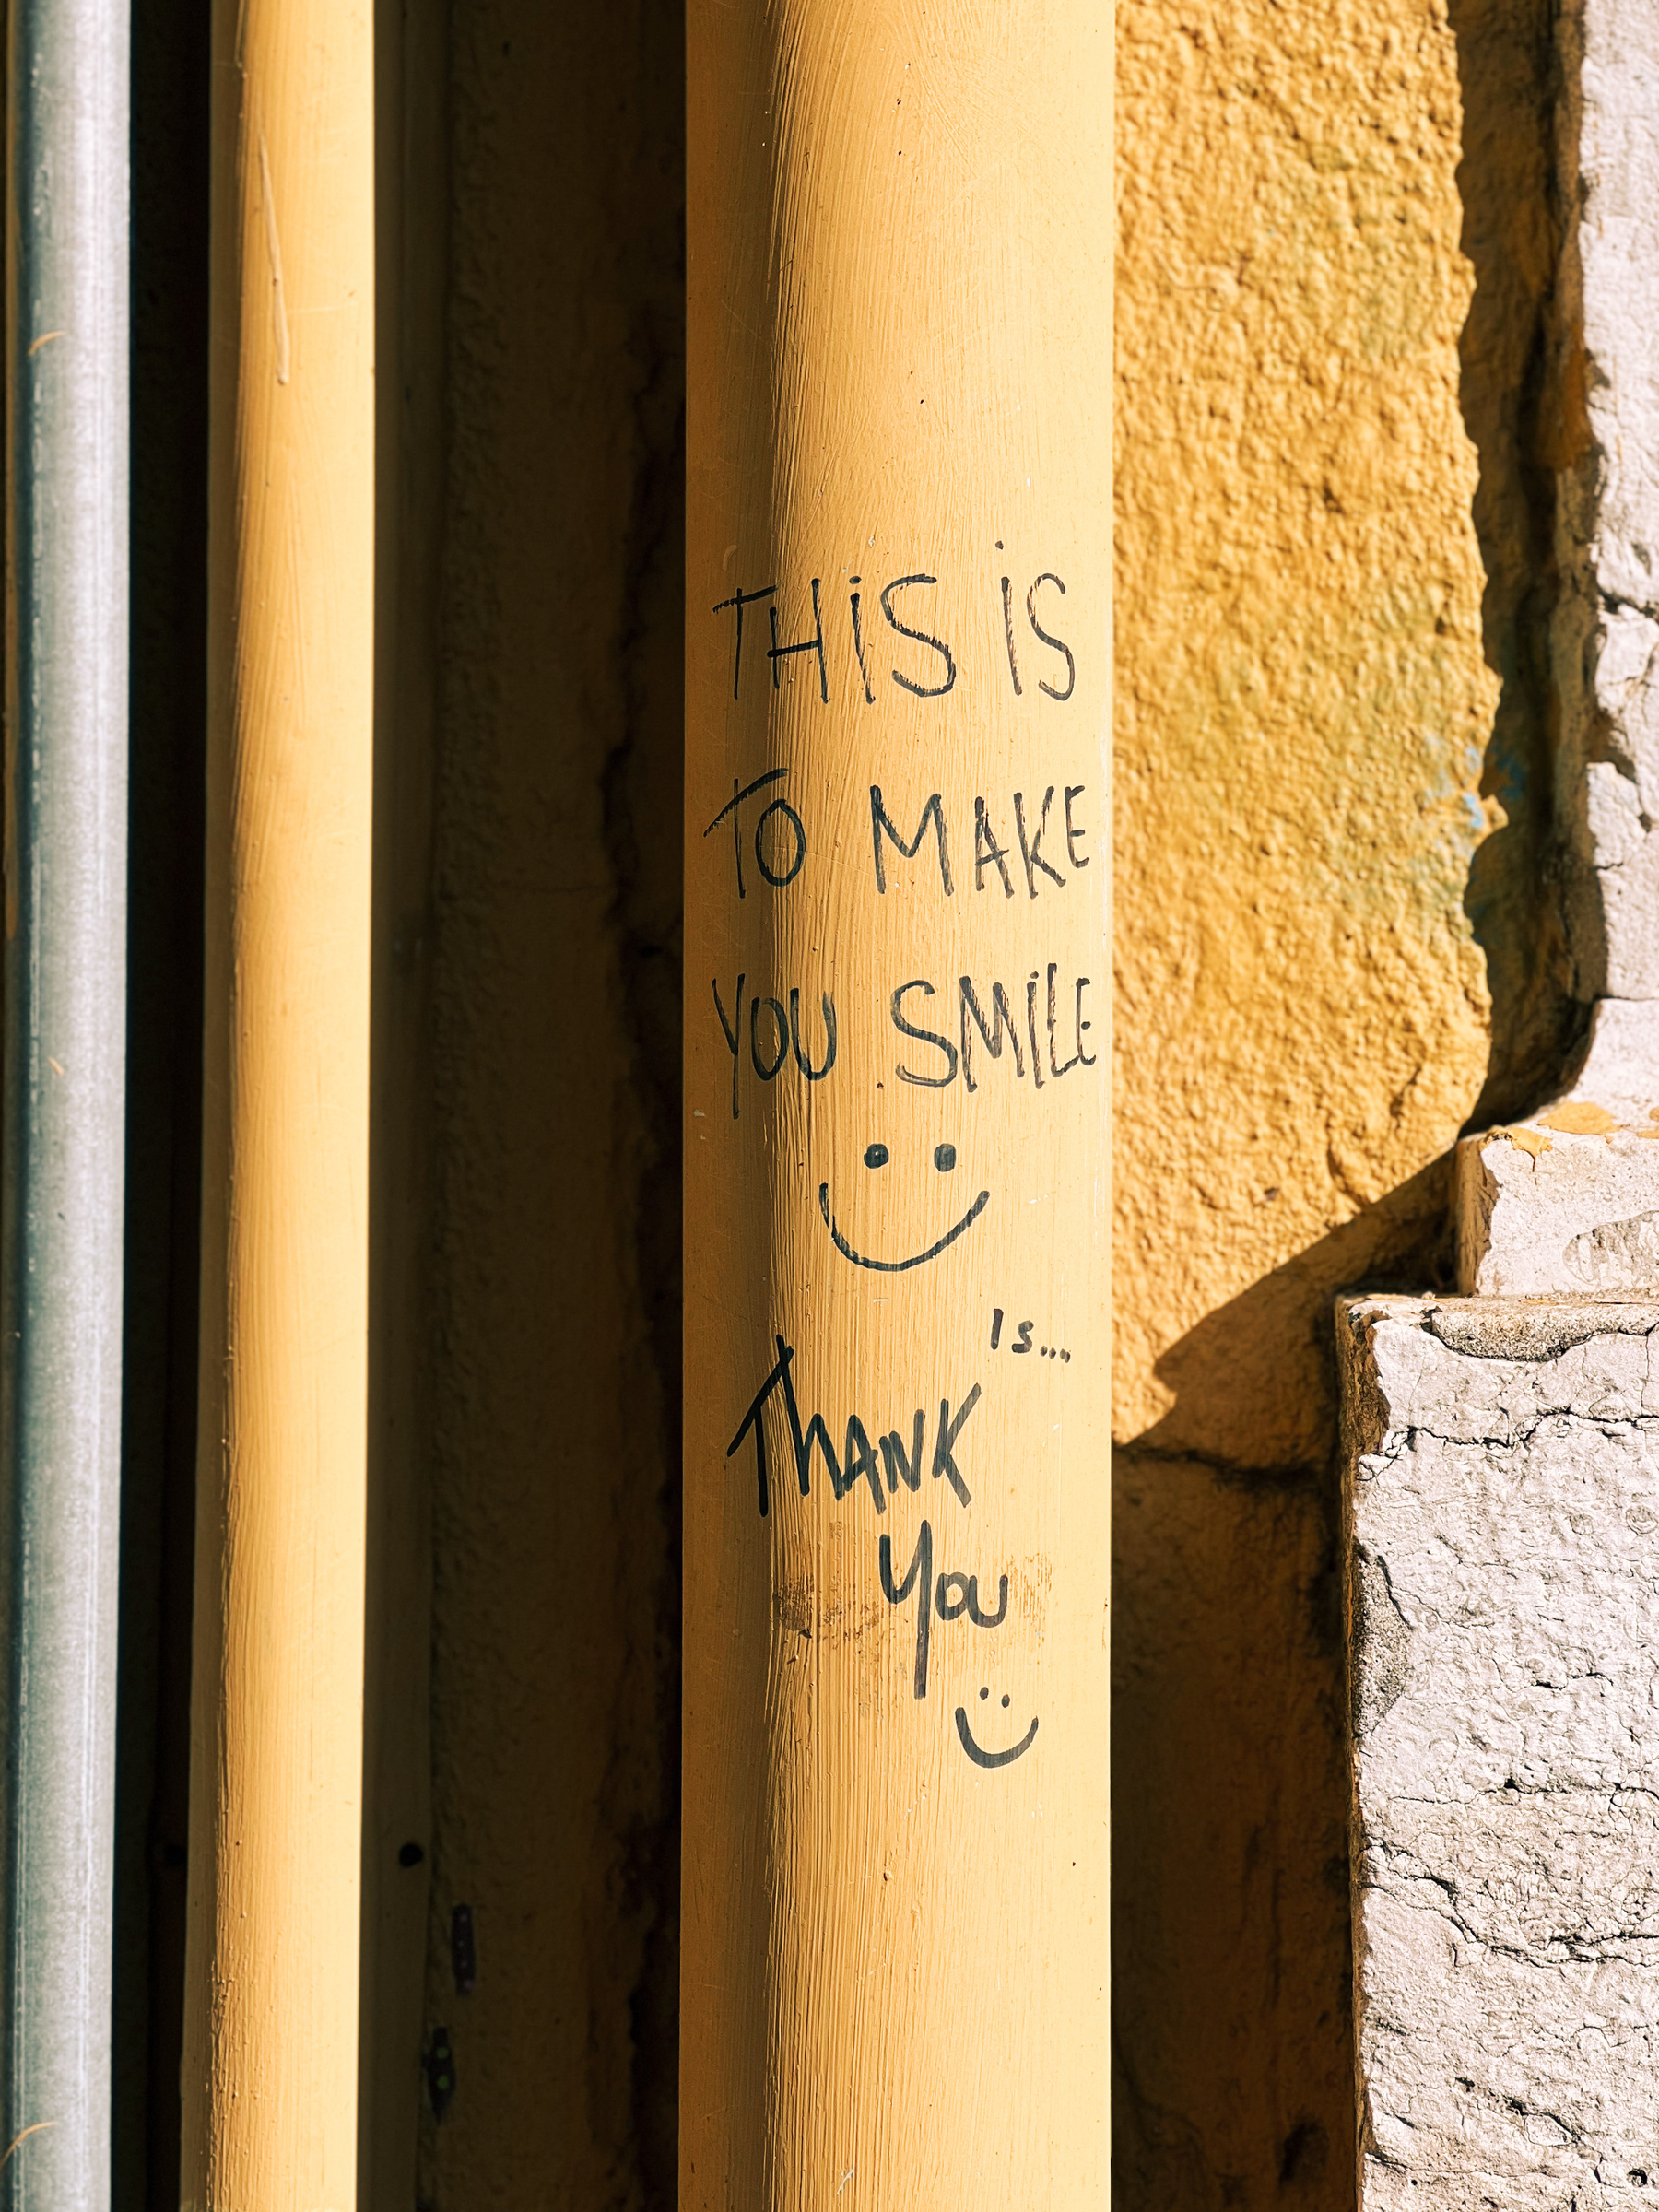 A pipe with “this is to make you smile, thank you” written on it. 